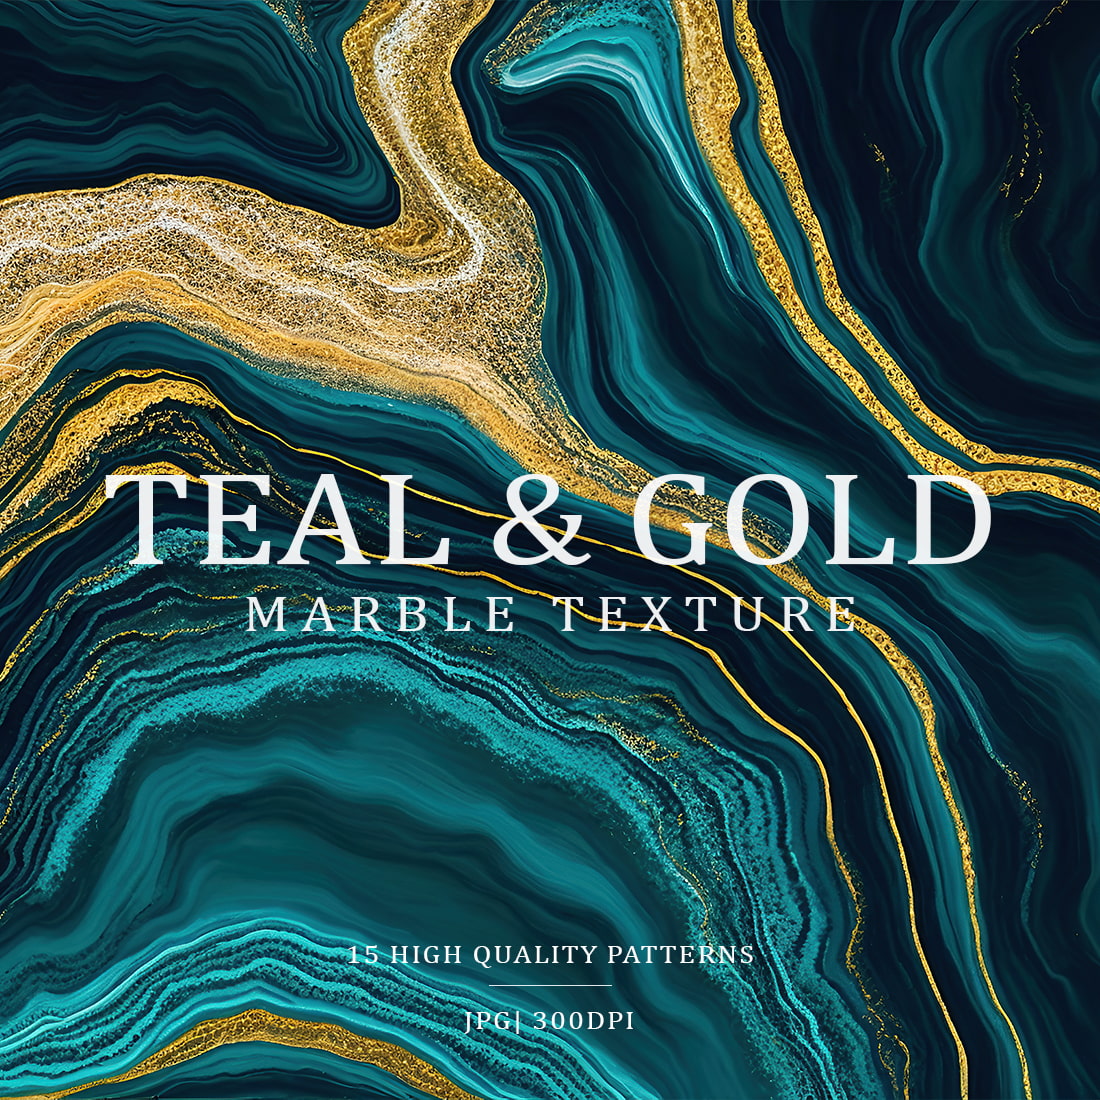 Teal & Gold Marble Textures cover image.